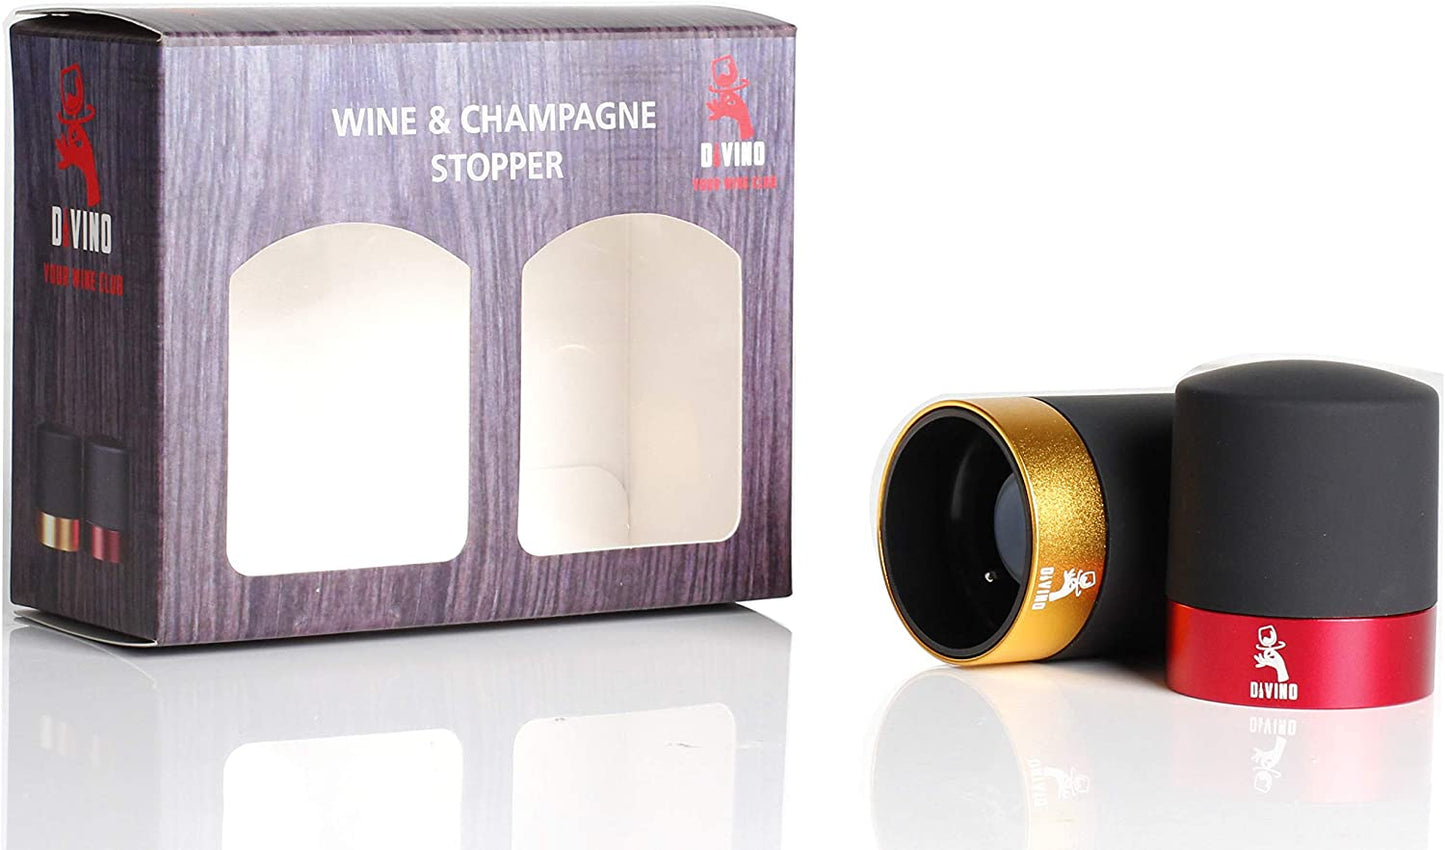 Wine and Champagne Stopper with Aluminium Ring for Wine & Champagne Set of 2 (GOLD & RED)